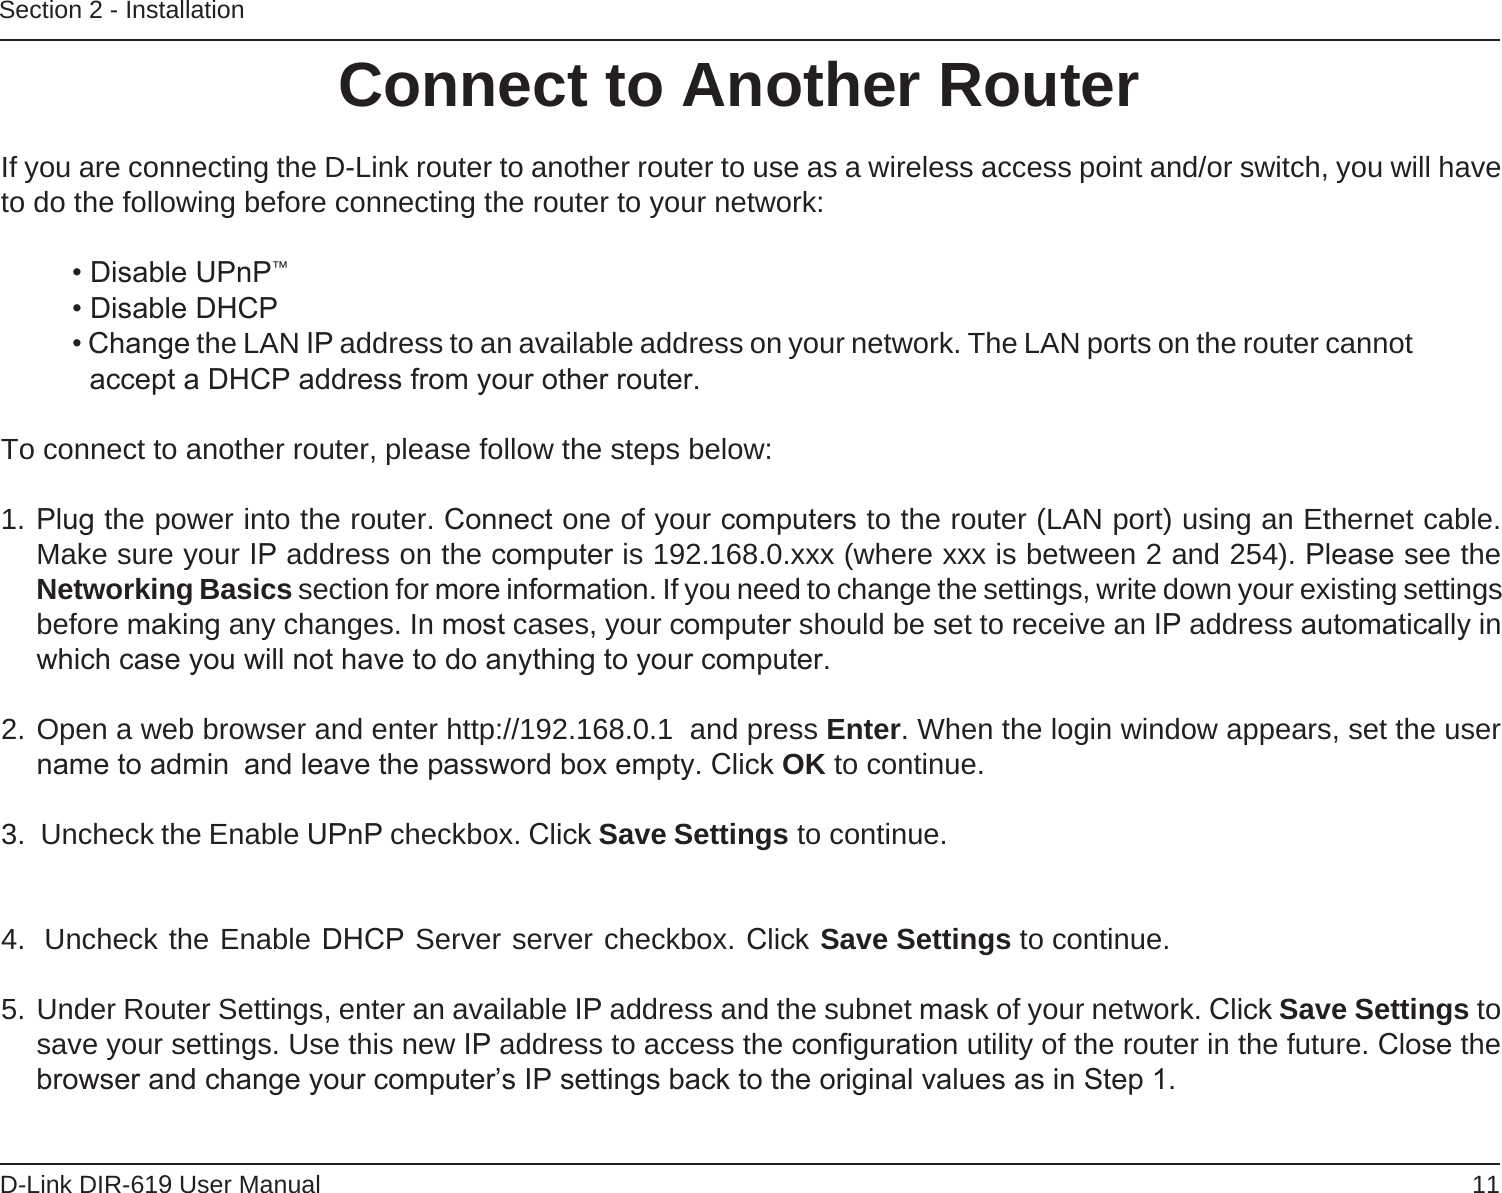 11D-Link DIR-619 User ManualSection 2 - InstallationIf you are connecting the D-Link router to another router to use as a wireless access point and/or switch, you will have to do the following before connecting the router to your network:• Disable UPnP™• Disable DHCP• Change the LAN IP address to an available address on your network. The LAN ports on the router cannot accept a DHCP address from your other router.To connect to another router, please follow the steps below:1. Plug the power into the router. Connect one of your computers to the router (LAN port) using an Ethernet cable. Make sure your IP address on the computer is 192.168.0.xxx (where xxx is between 2 and 254). Please see the Networking Basics section for more information. If you need to change the settings, write down your existing settings before making any changes. In most cases, your computer should be set to receive an IP address automatically in which case you will not have to do anything to your computer.2. Open a web browser and enter http://192.168.0.1  and press Enter. When the login window appears, set the user name to admin  and leave the password box empty. Click OK to continue.3.  Uncheck the Enable UPnP checkbox. Click Save Settings to continue. 4.  Uncheck the Enable DHCP Server server checkbox. Click Save Settings to continue.5. Under Router Settings, enter an available IP address and the subnet mask of your network. Click Save Settings to save your settings. Use this new IP address to access the conﬁguration utility of the router in the future. Close the browser and change your computer’s IP settings back to the original values as in Step 1.Connect to Another Router